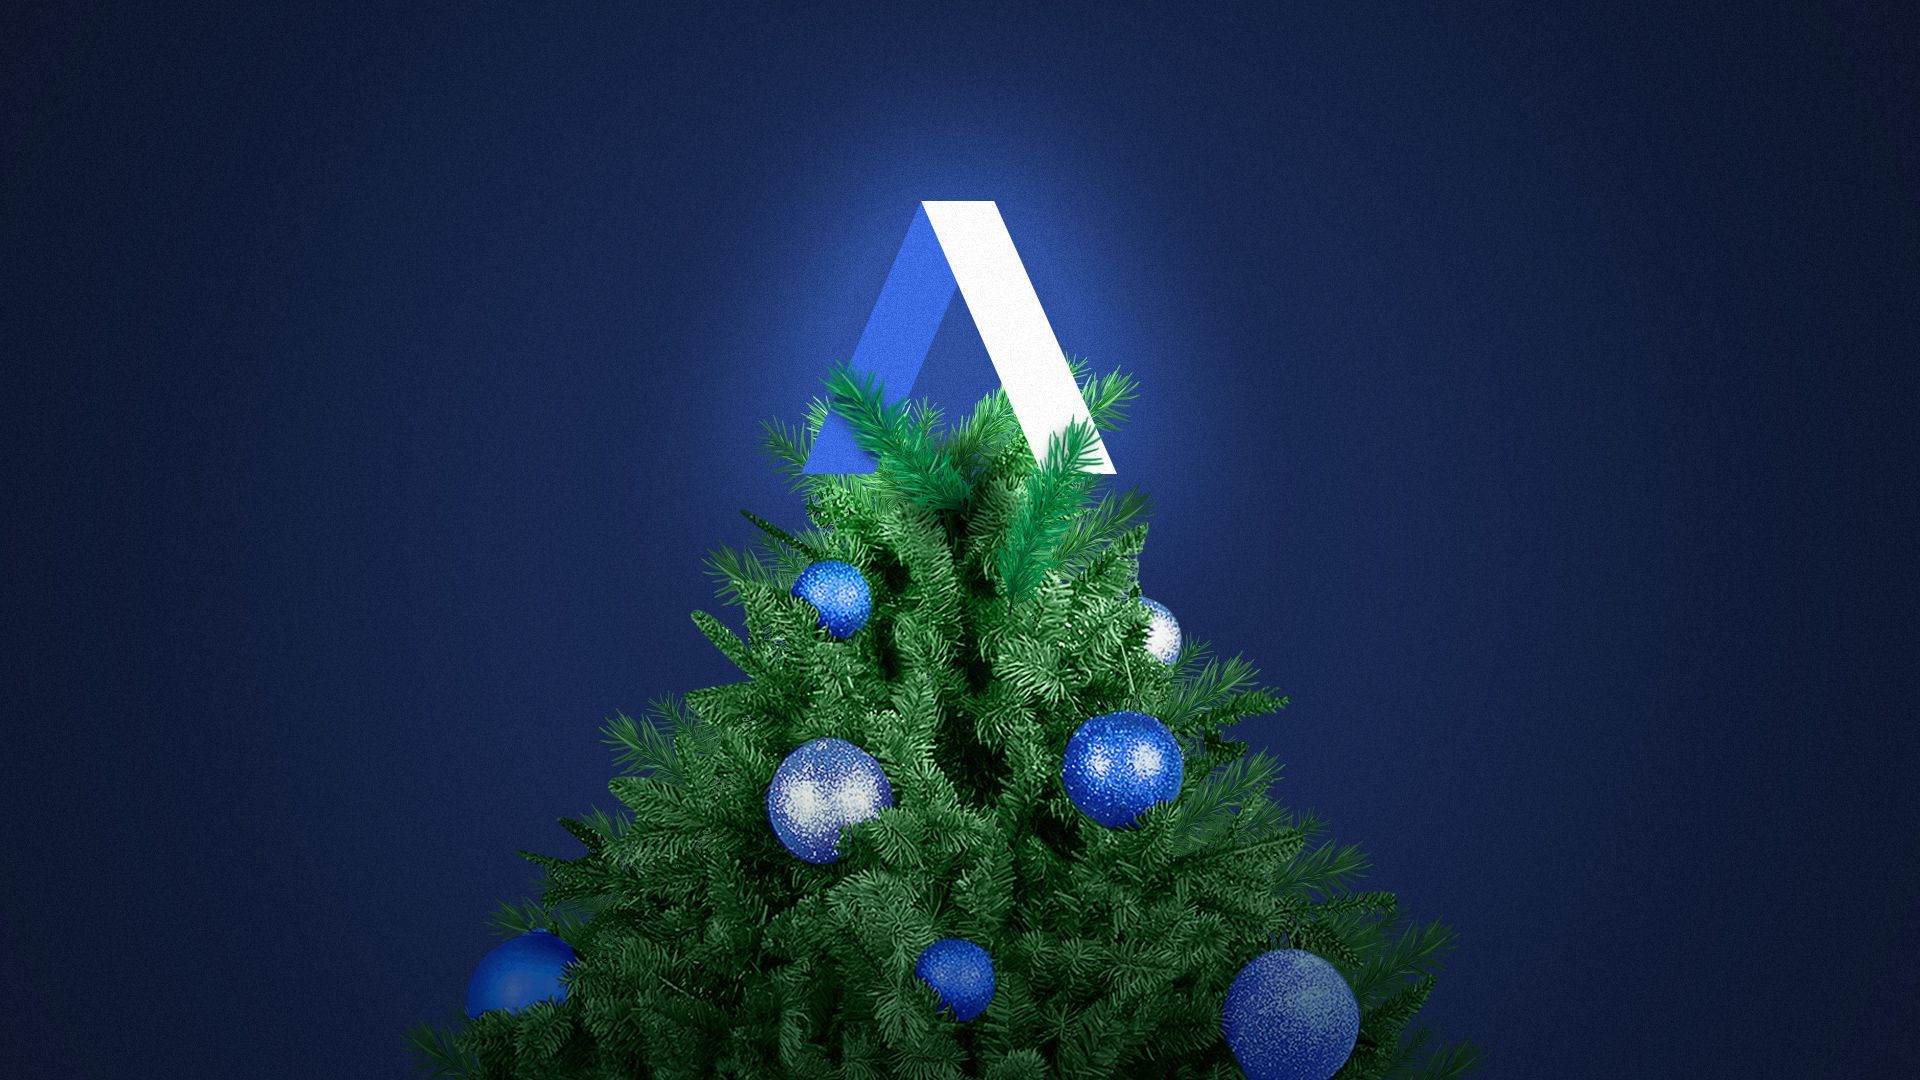 Illustration of a Christmas tree with the Axios "A" as the topper. 